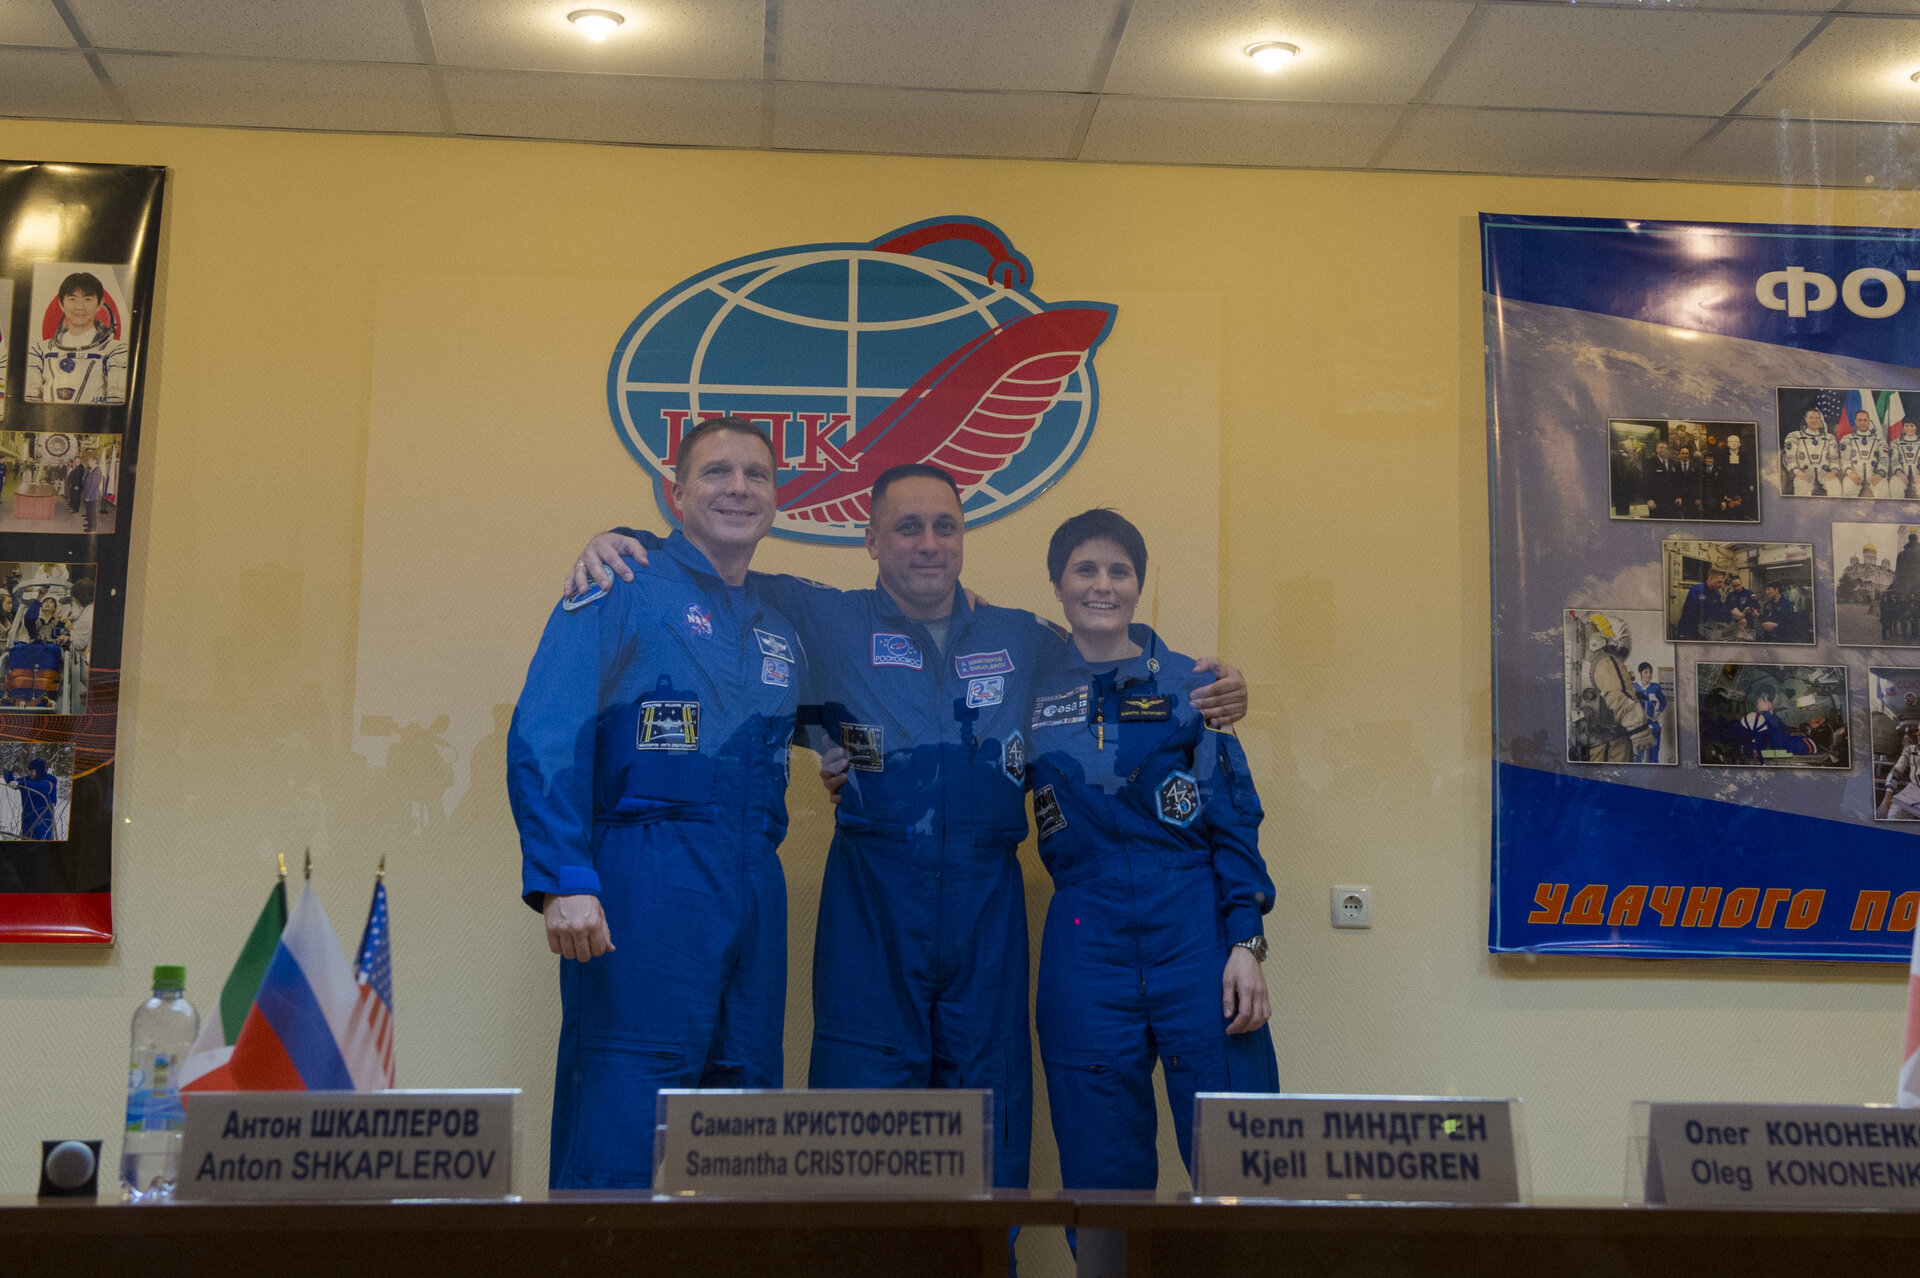 Expedition 42/43 prime crew members during press conference